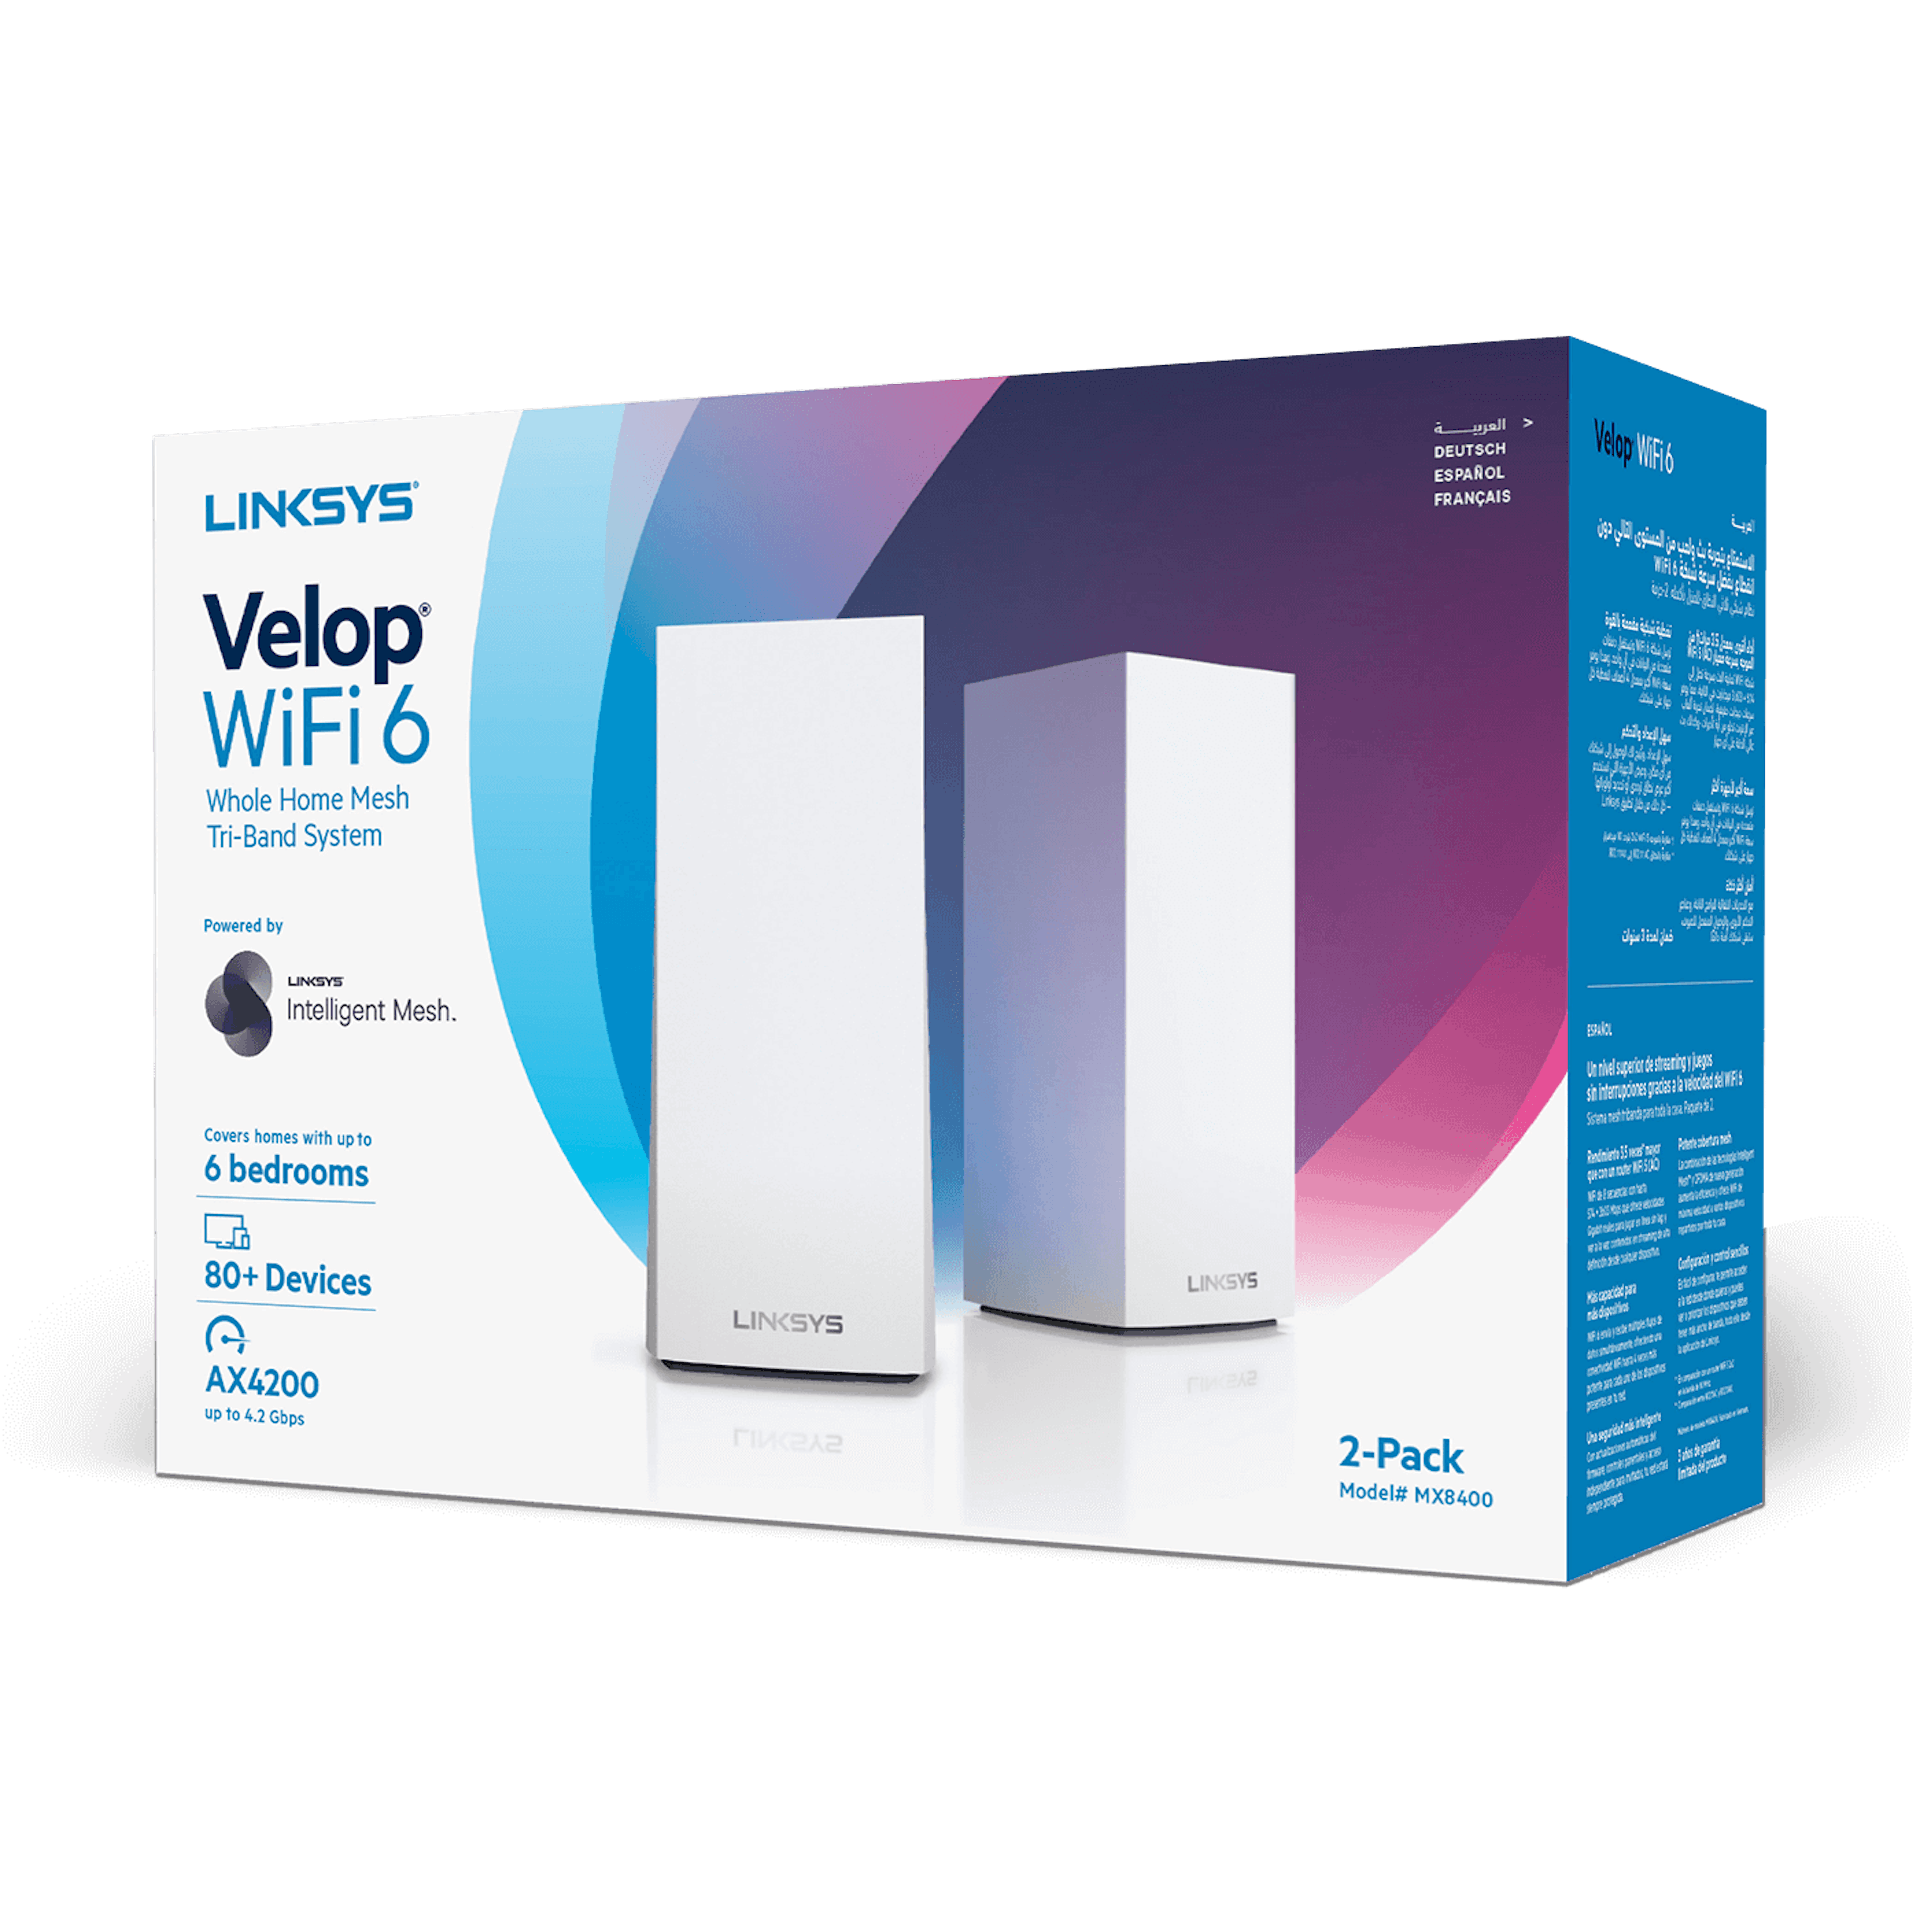 Linksys Velop WiFi 6 (MX8400) - Details - Packaging image